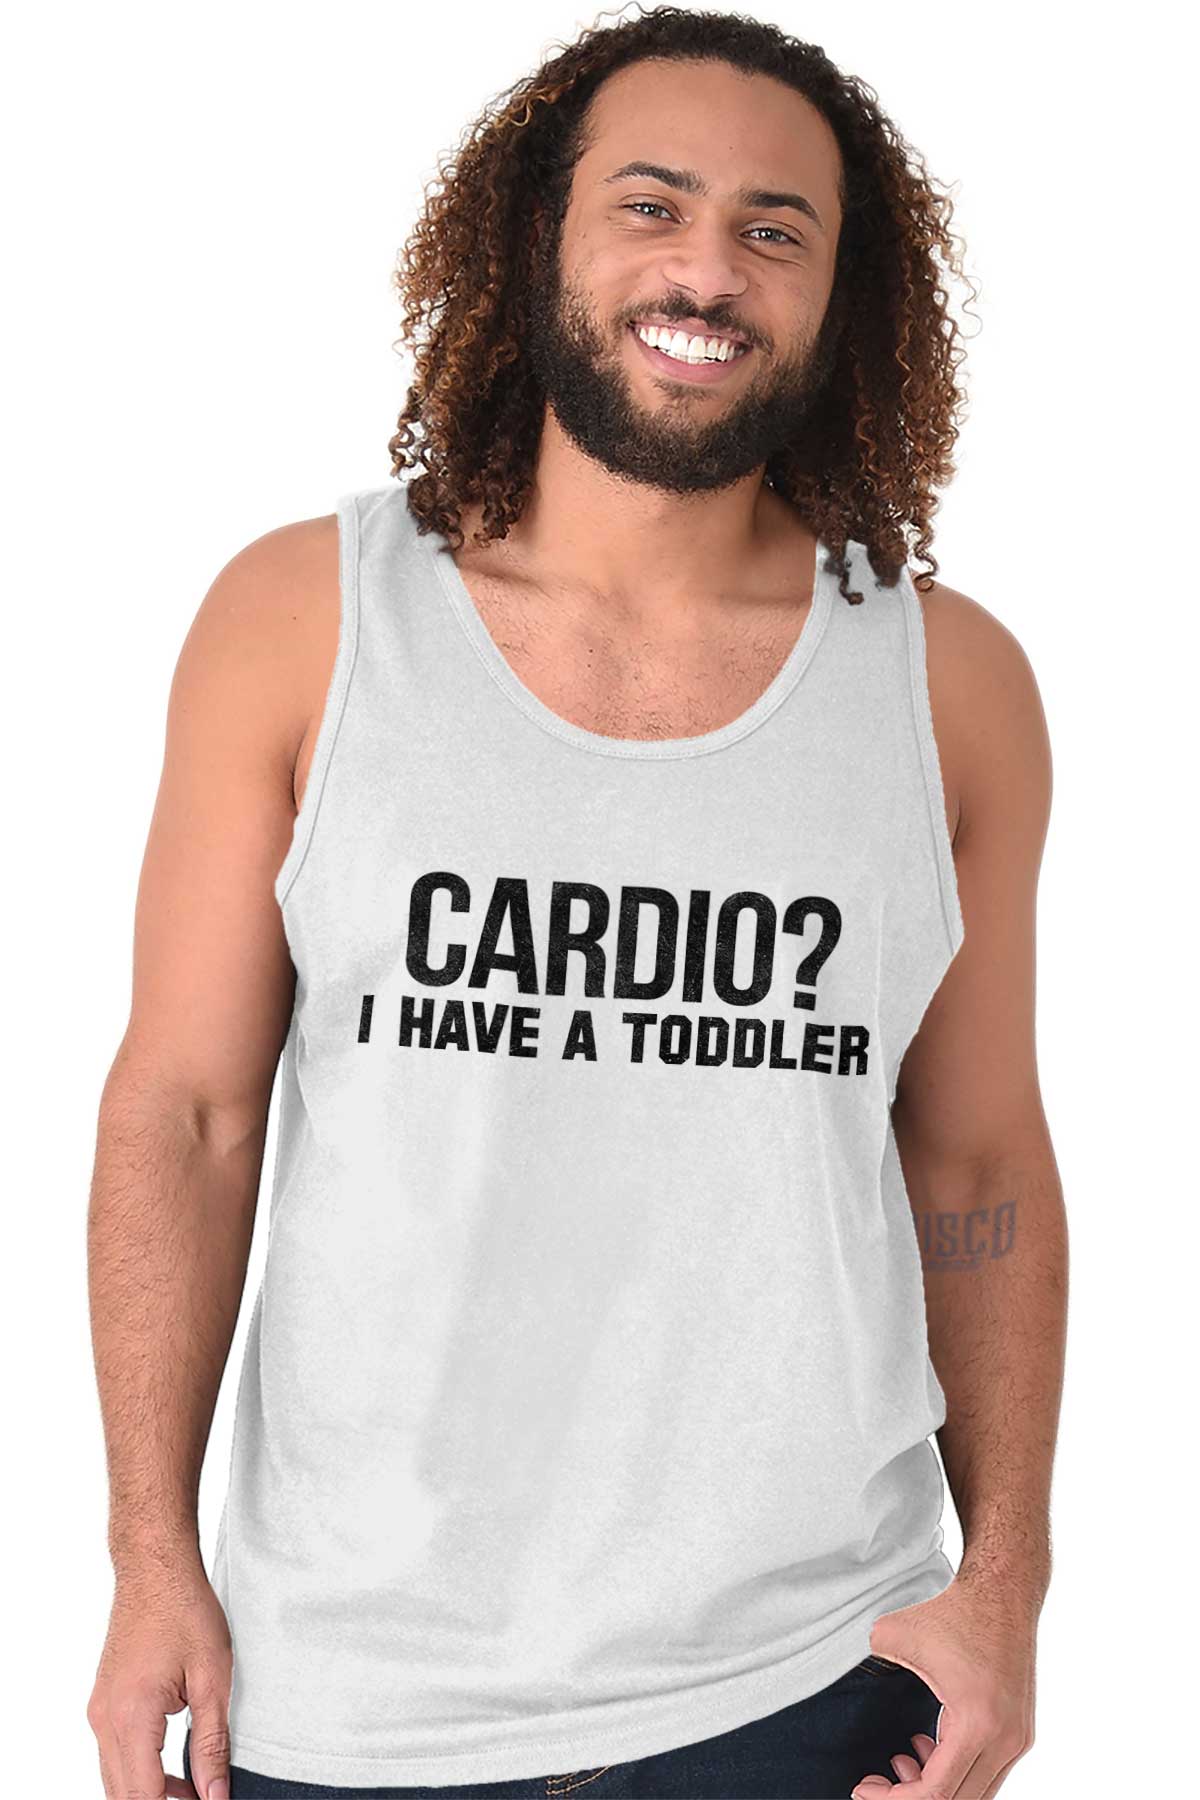 Cardio I Have a Toddler Funny Mom Gym Tank Top T Shirts Men Women Brisco Brands X - image 1 of 7